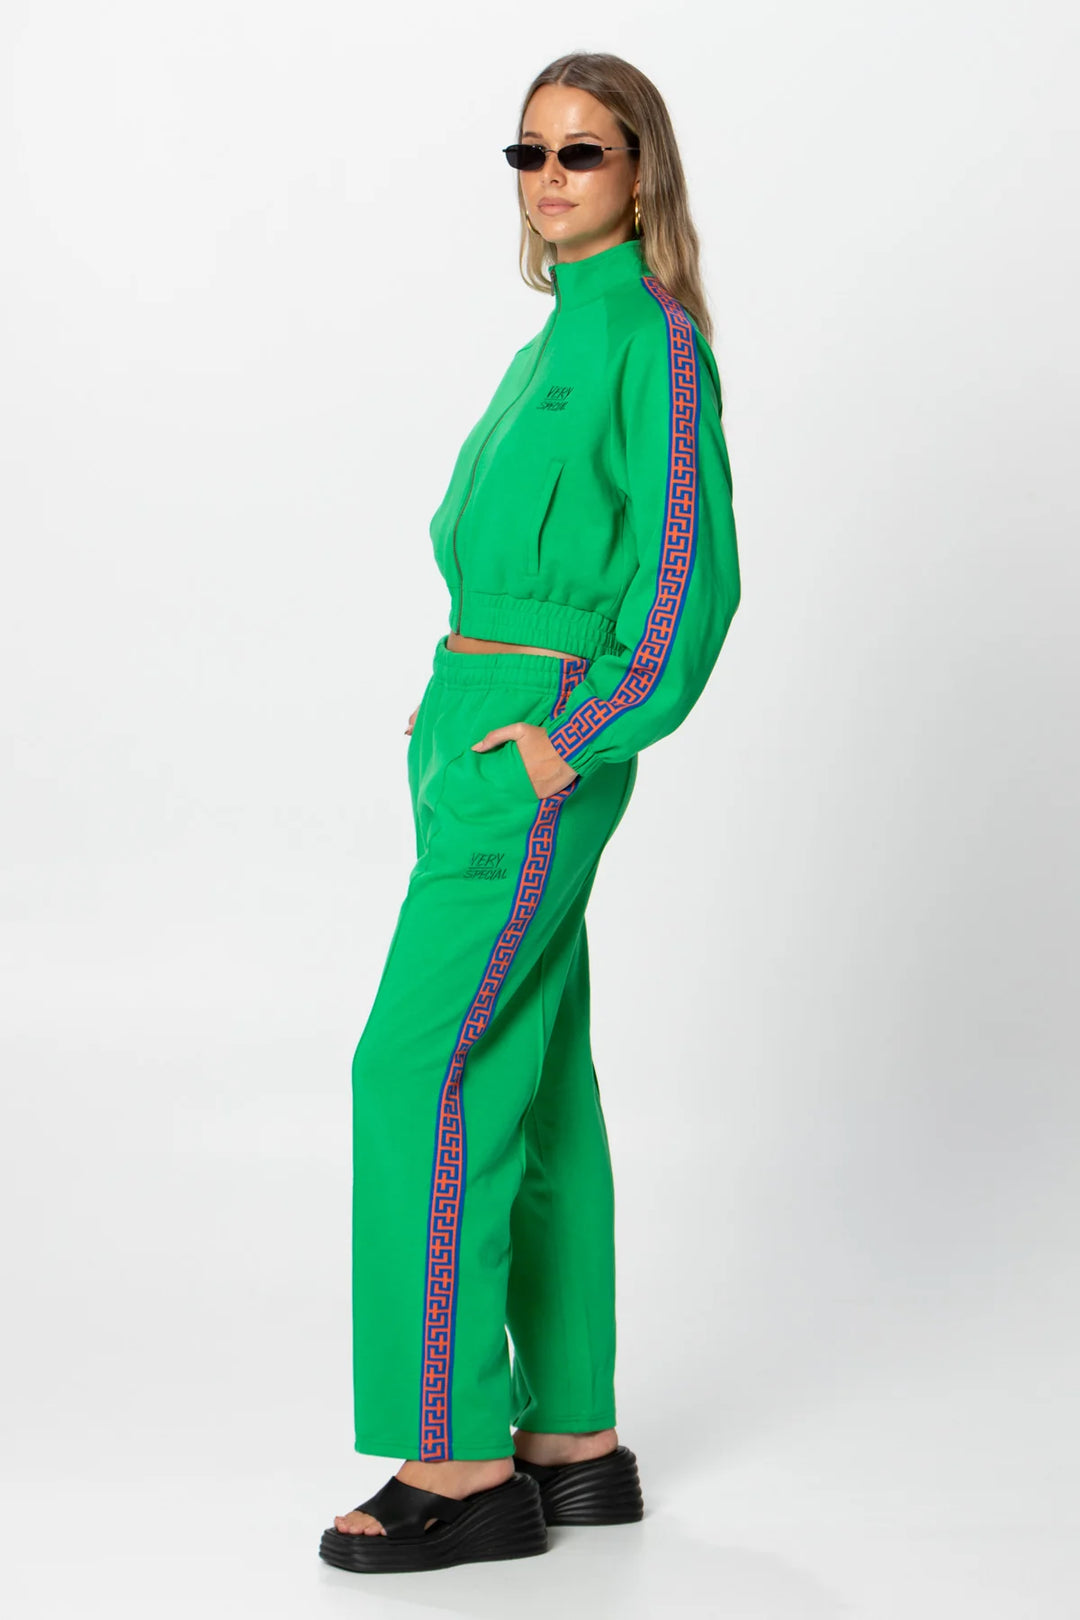 Something Very Special - Geo Track Pants 3.0 - Kelly Green